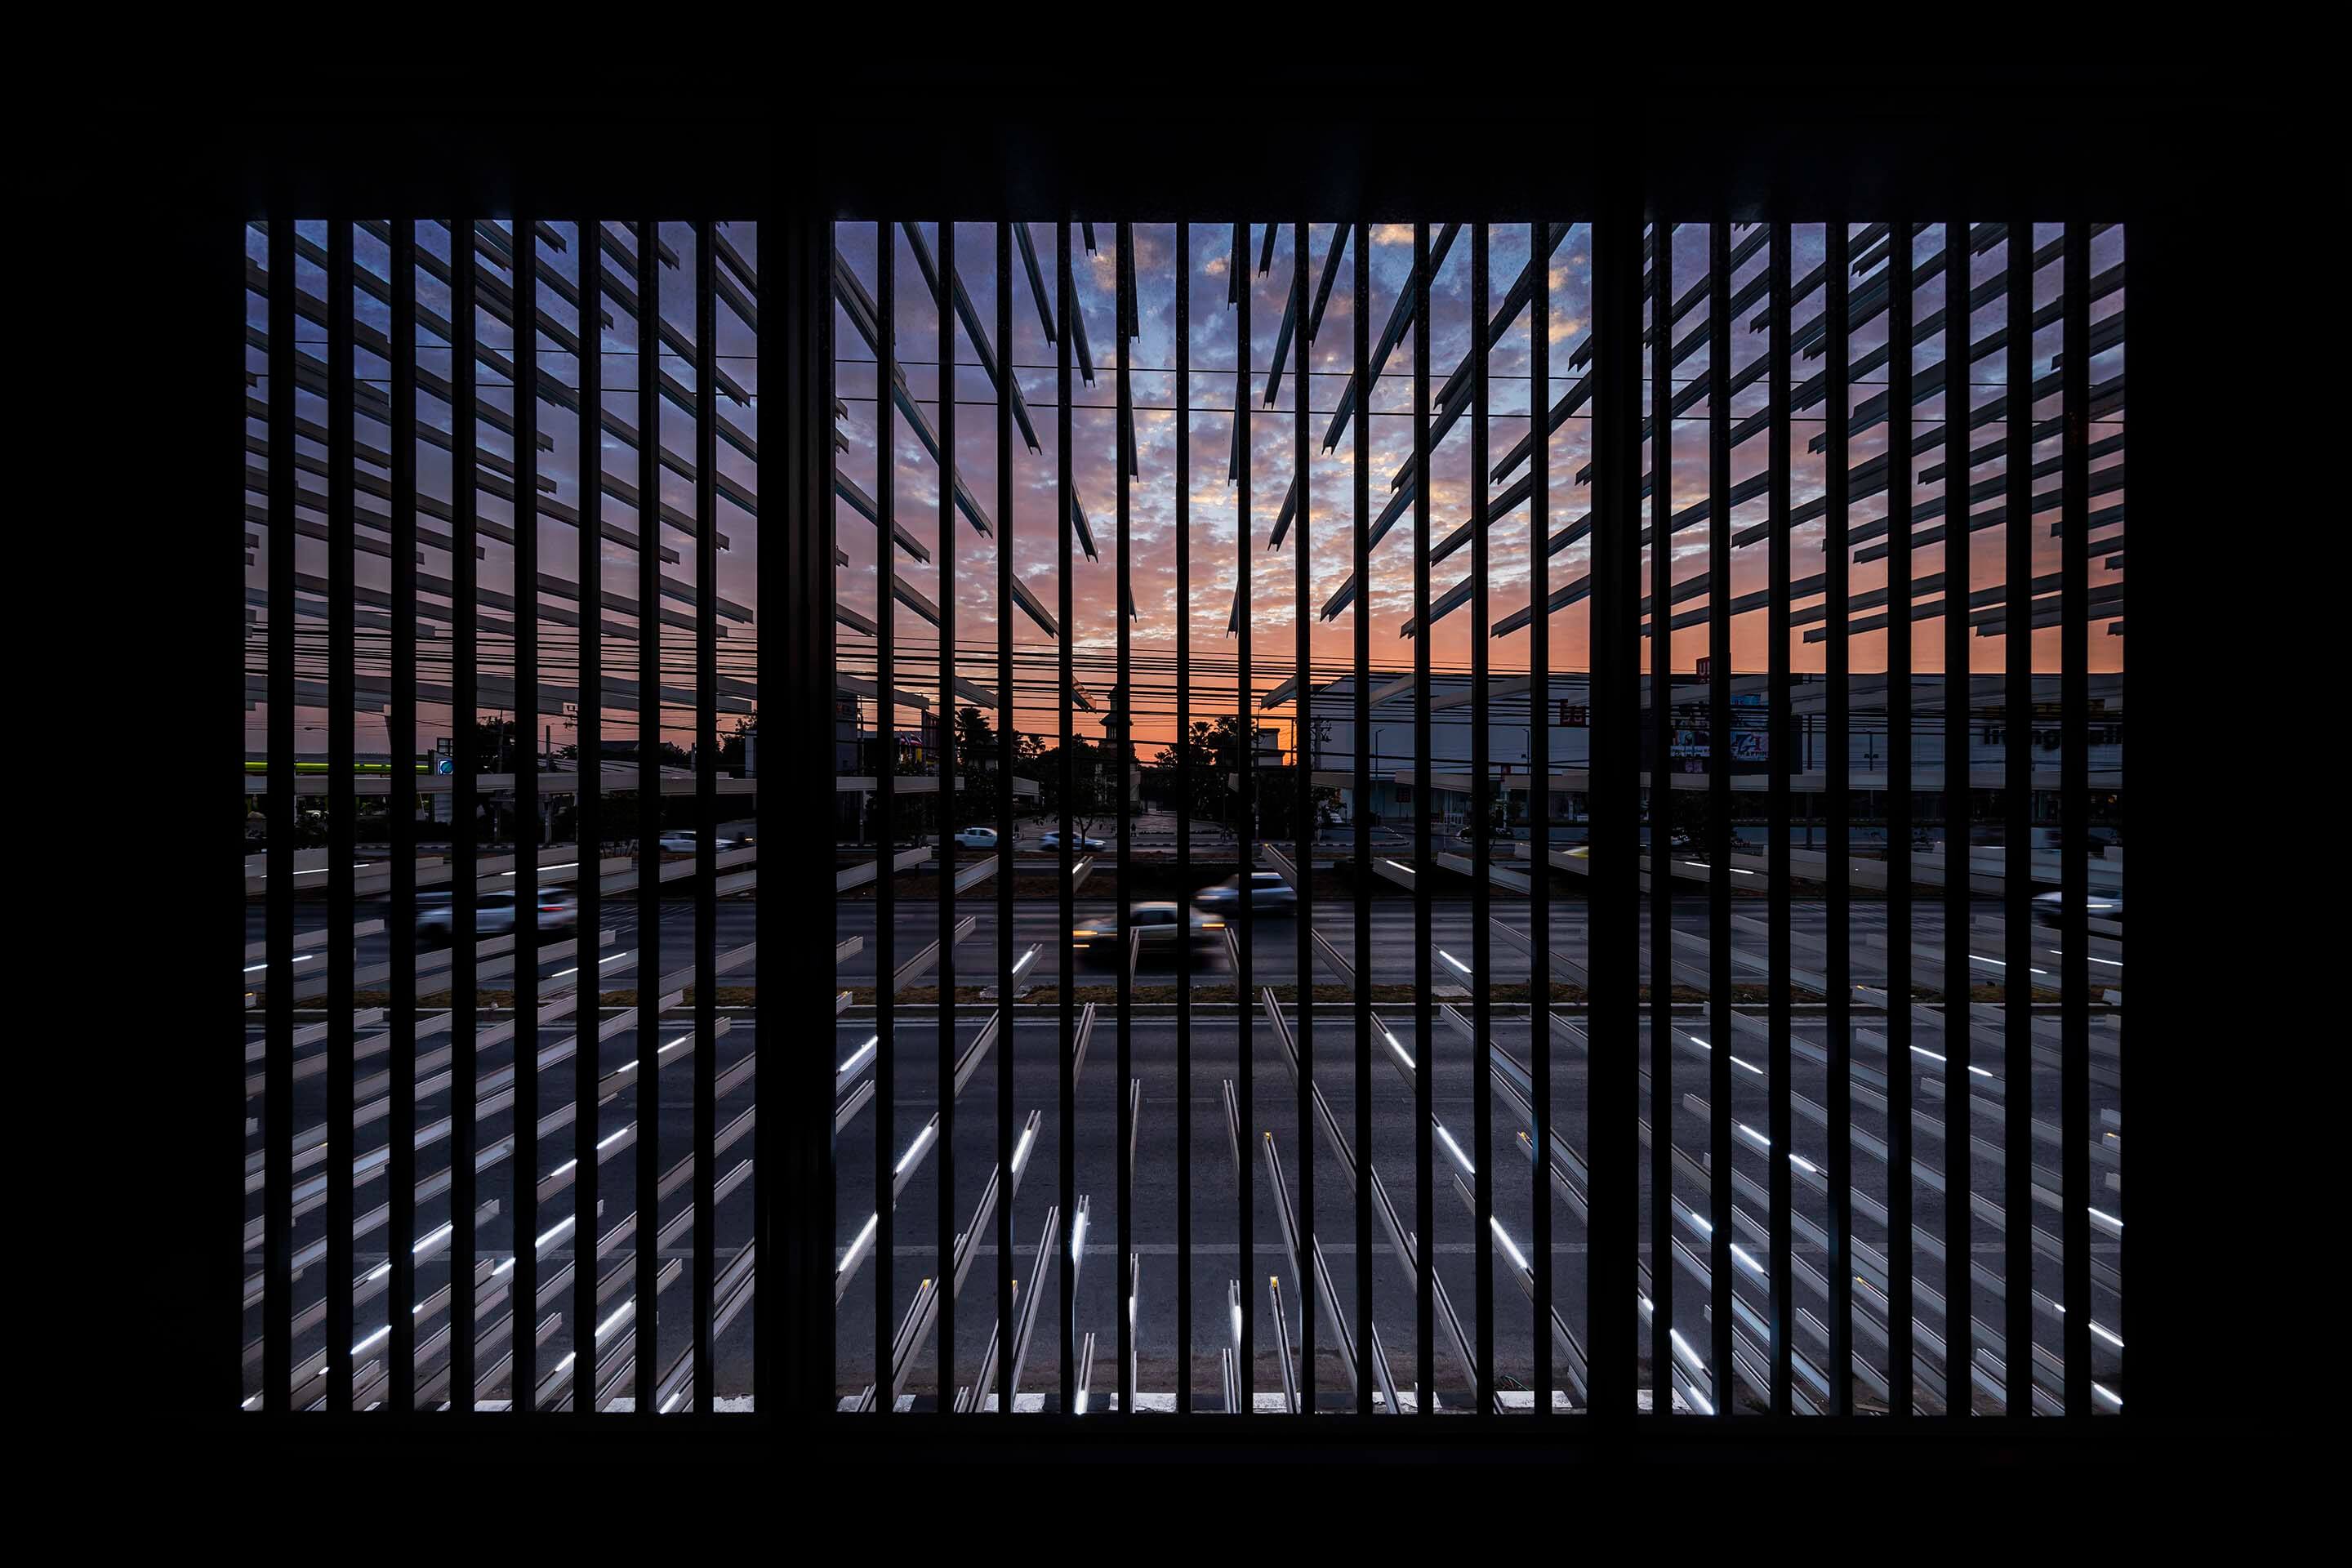 looking out at a parking lot through strips of metal